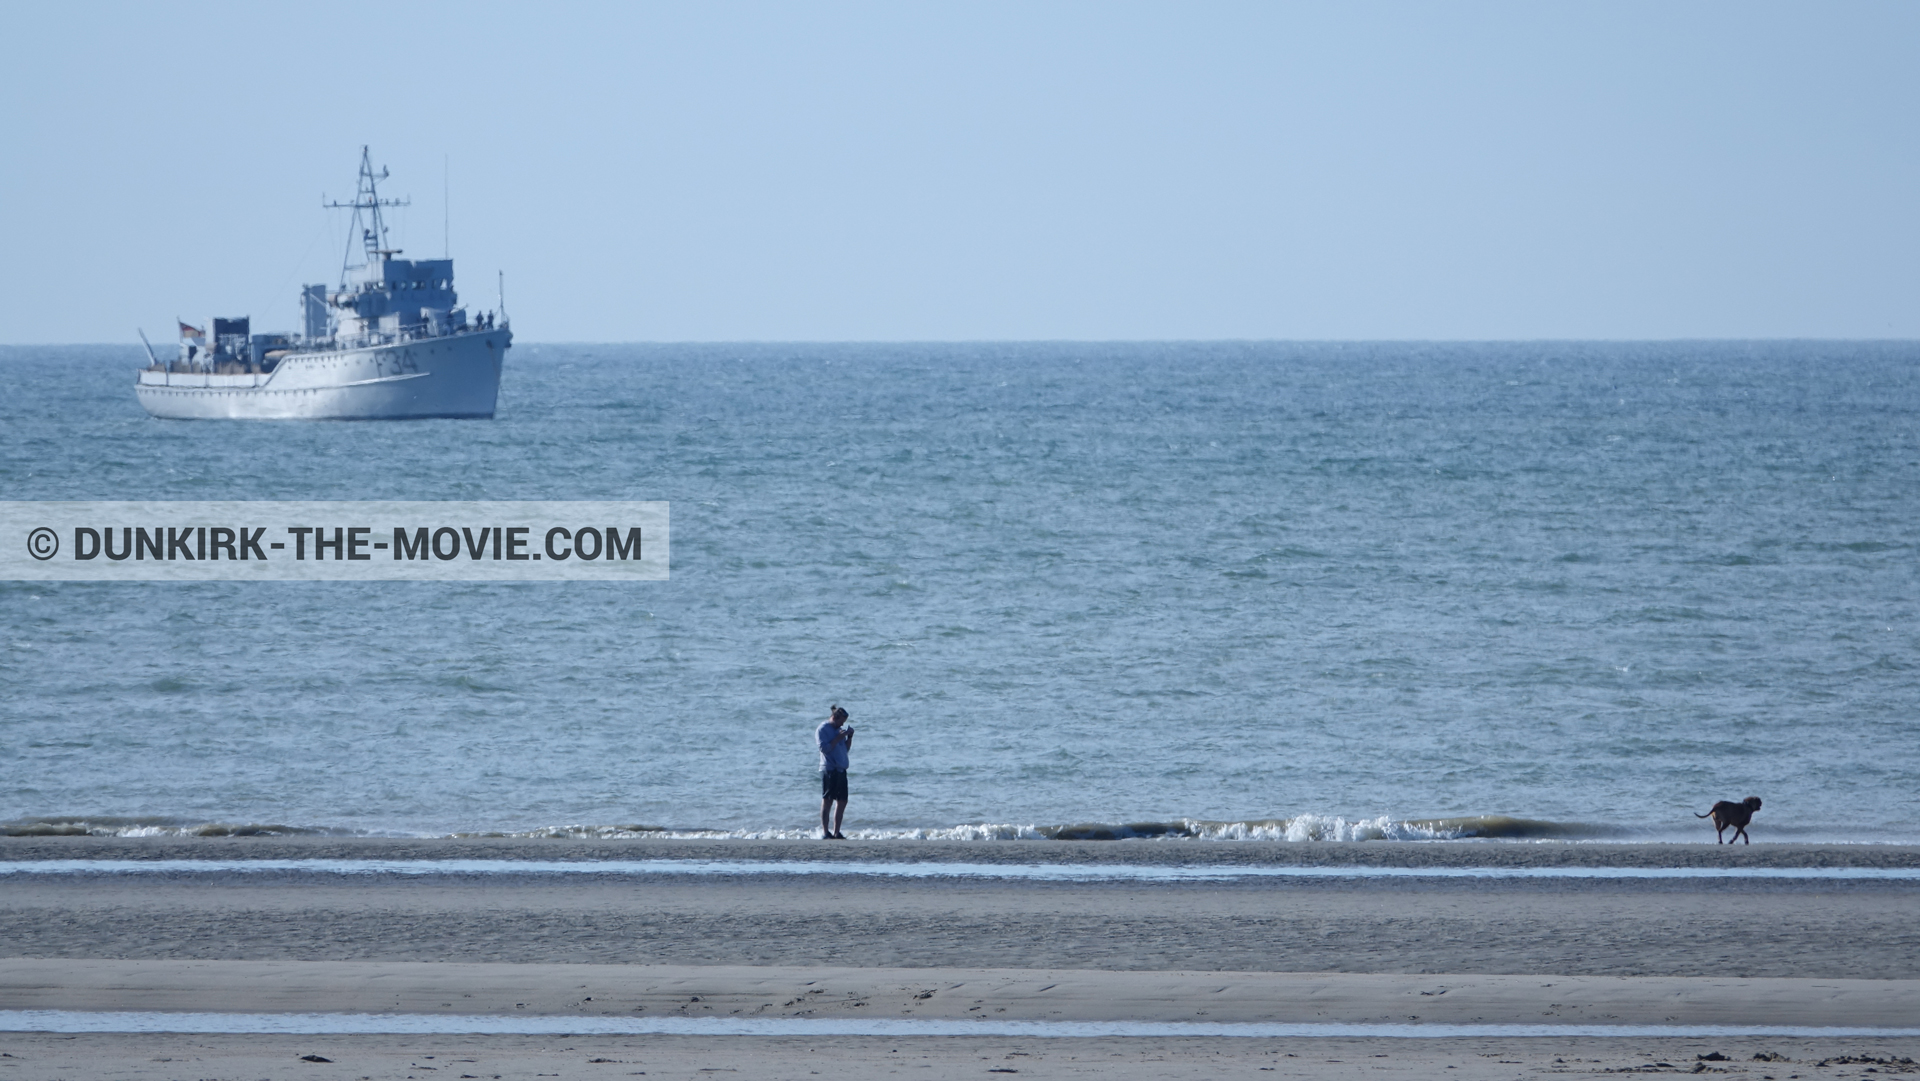 Picture with blue sky, F34 - Hr.Ms. Sittard, beach,  from behind the scene of the Dunkirk movie by Nolan